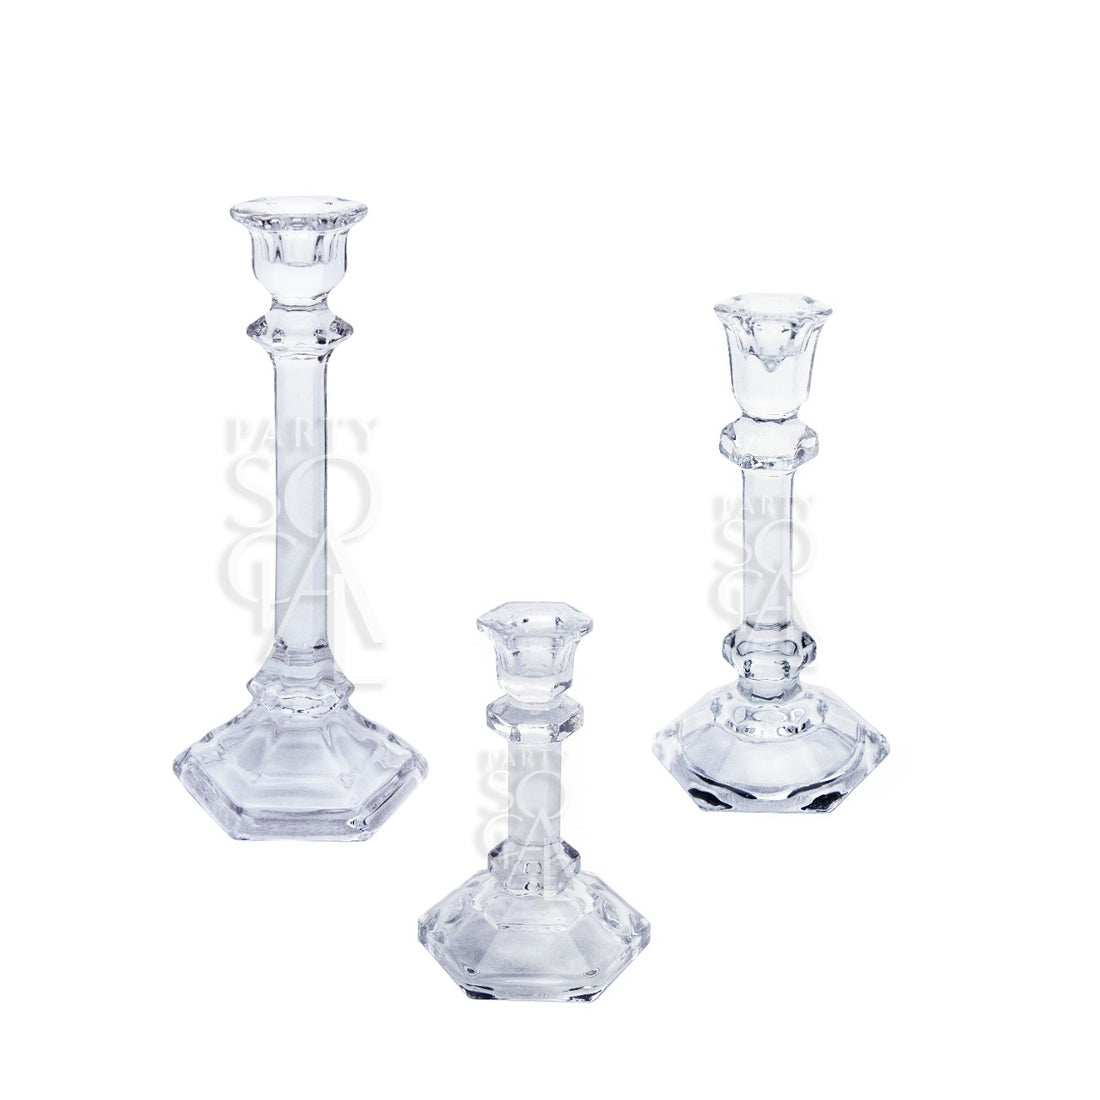 TAPERED GLASS CANDLE HOLDERS SET OF 3